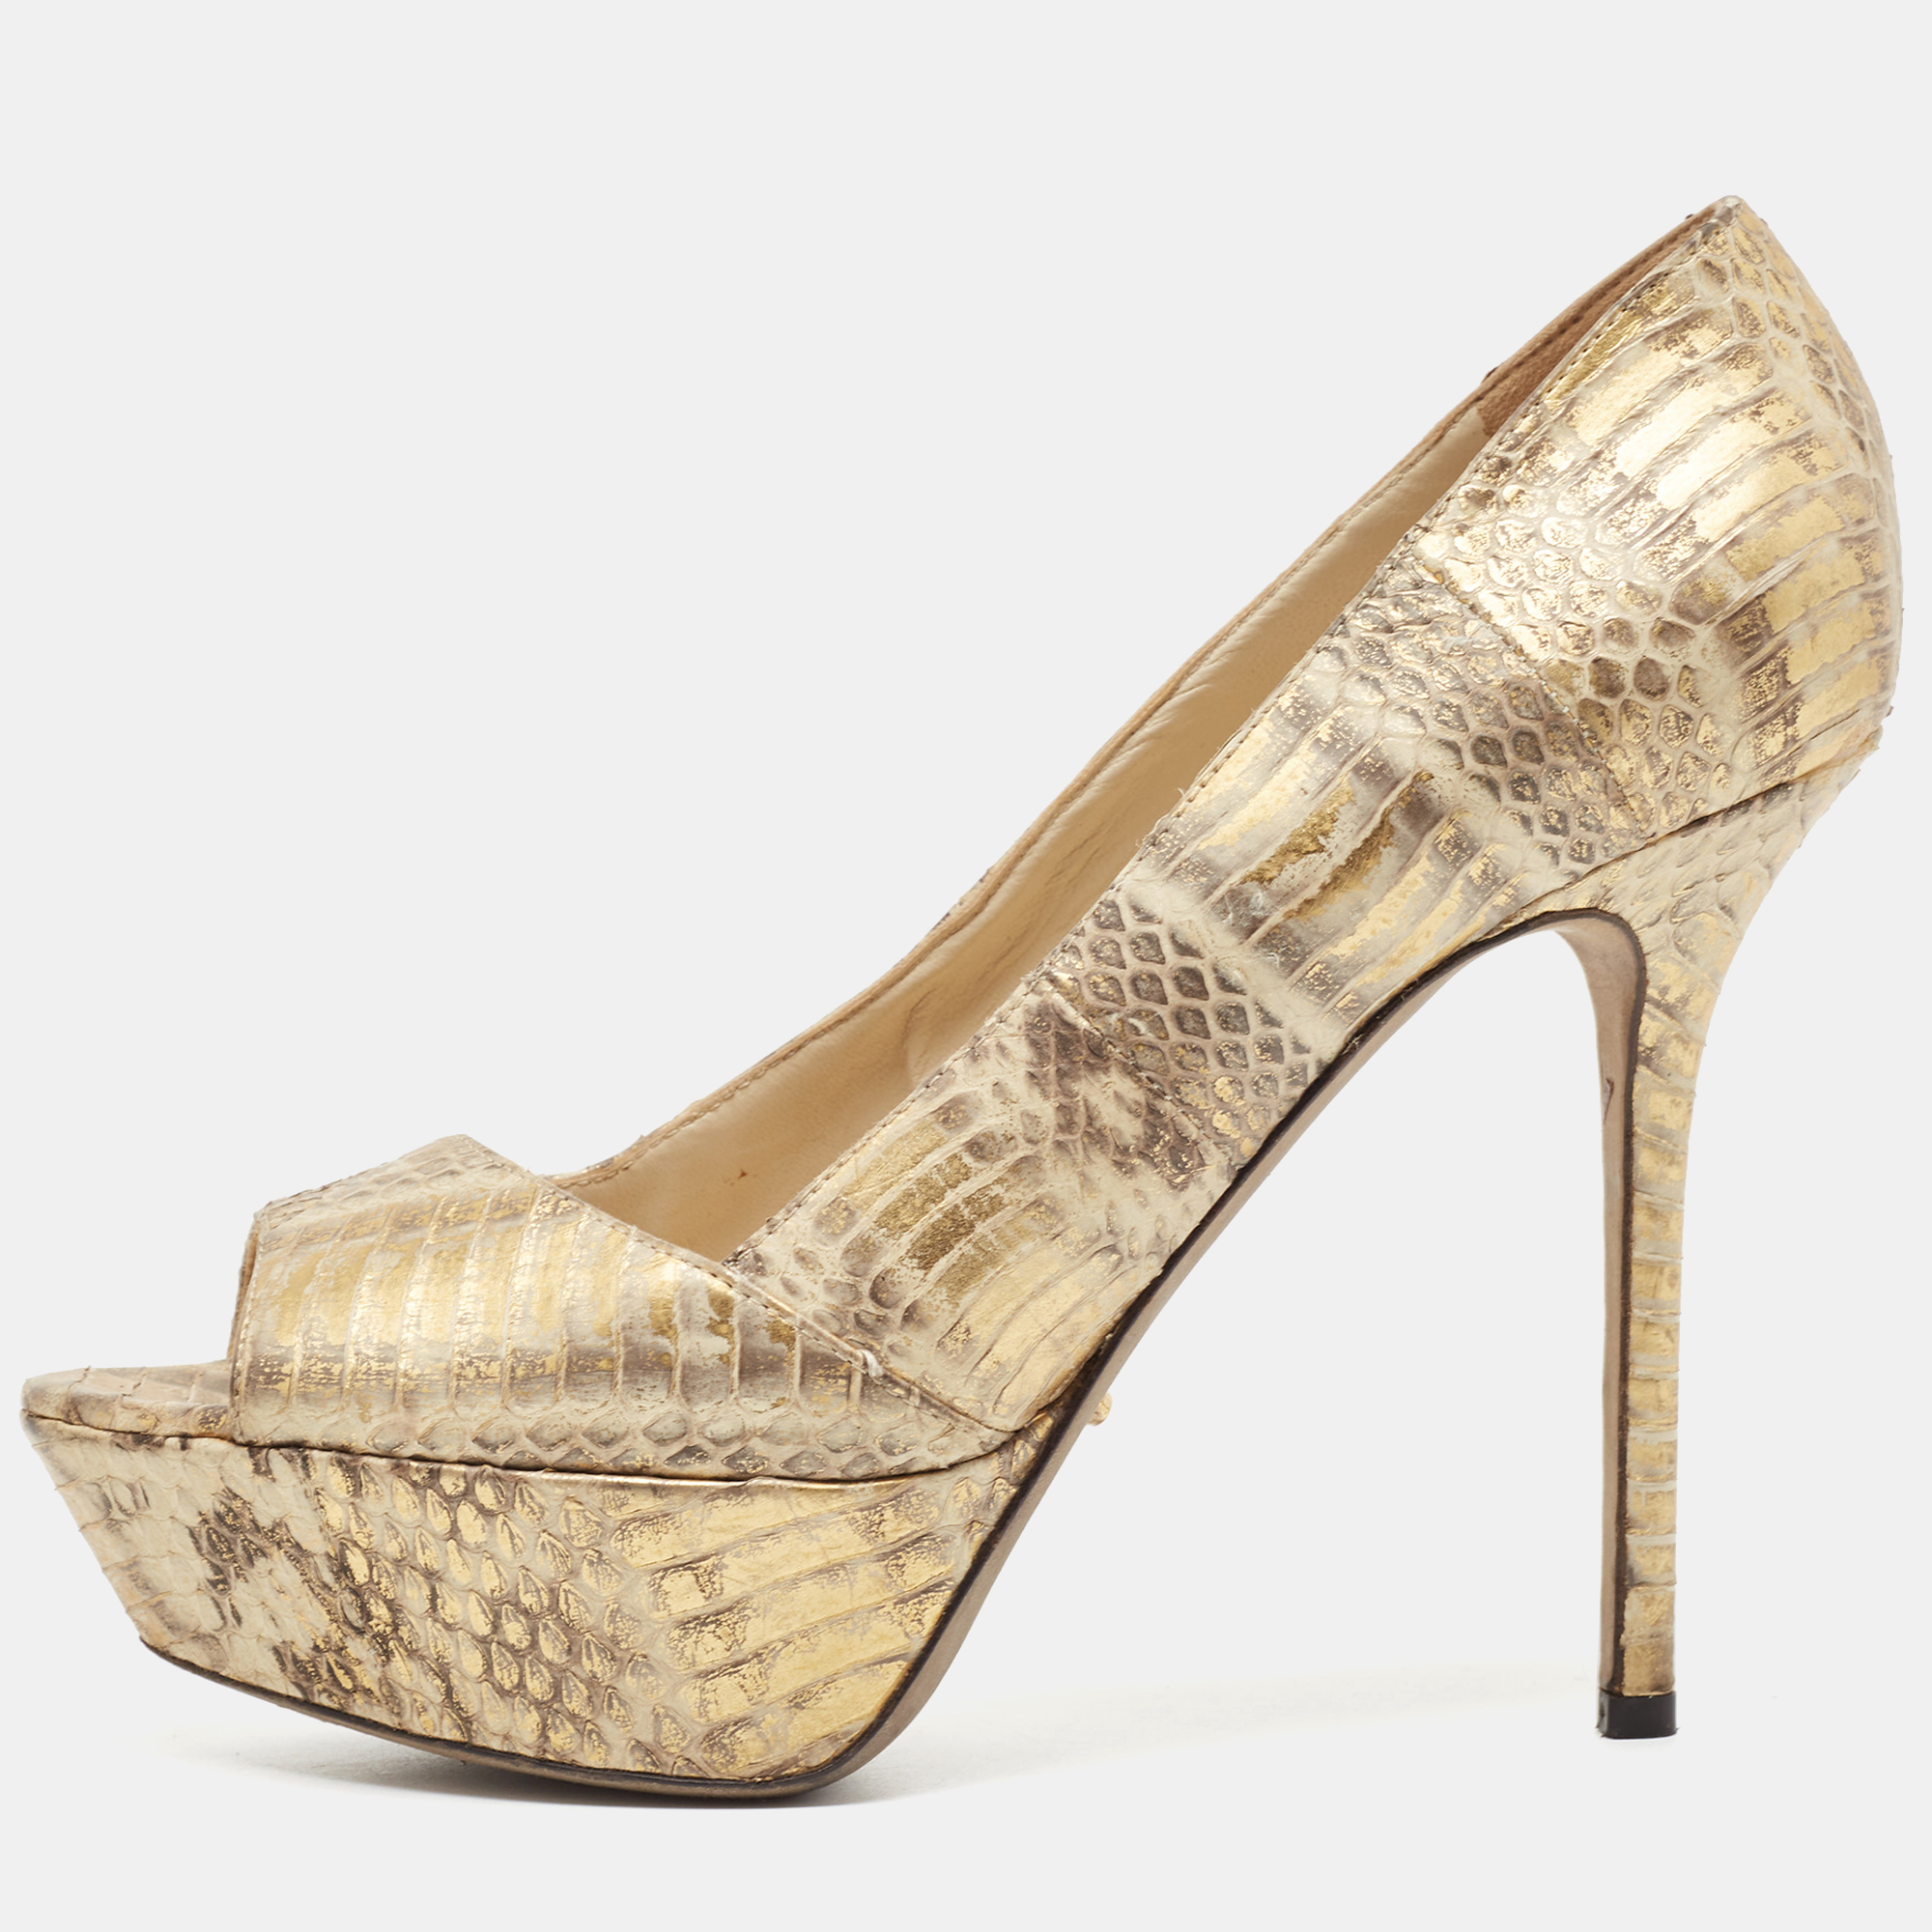 Sergio rossi beige/gold water snake embossed leather peep toe pumps size 38.5